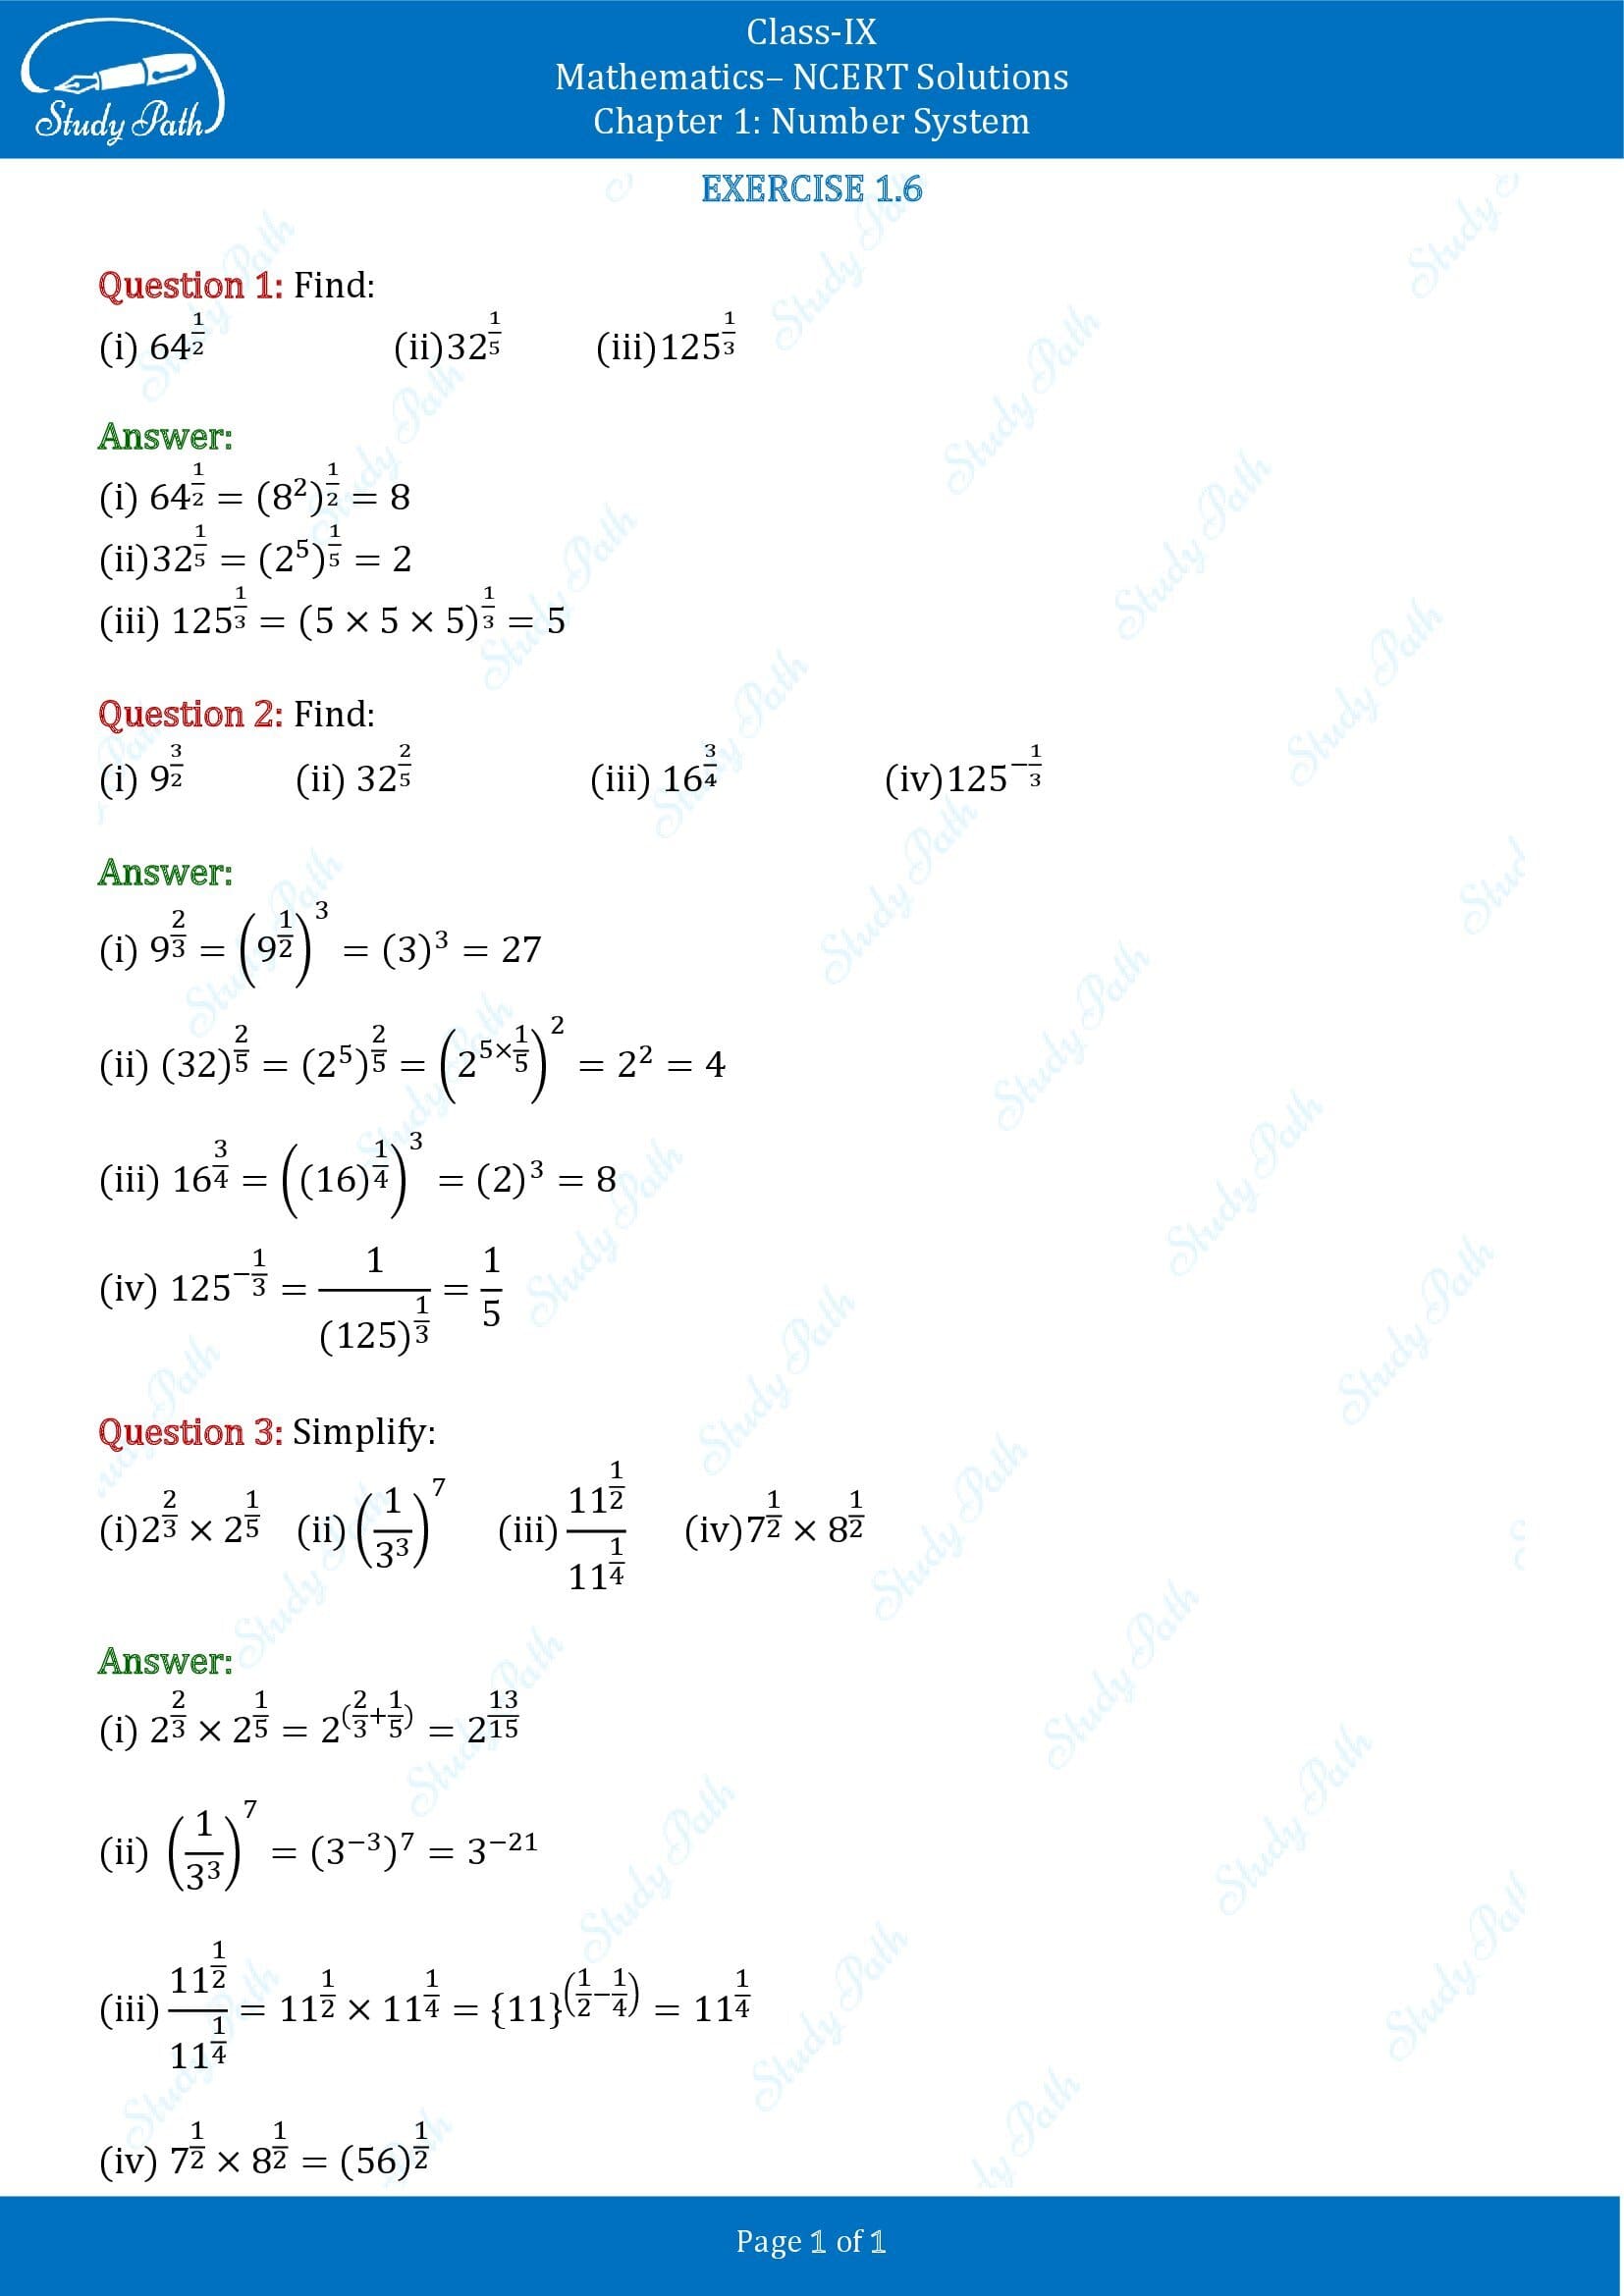 NCERT Solutions for Class 9 Maths Chapter 1 Number System Exercise 1.6